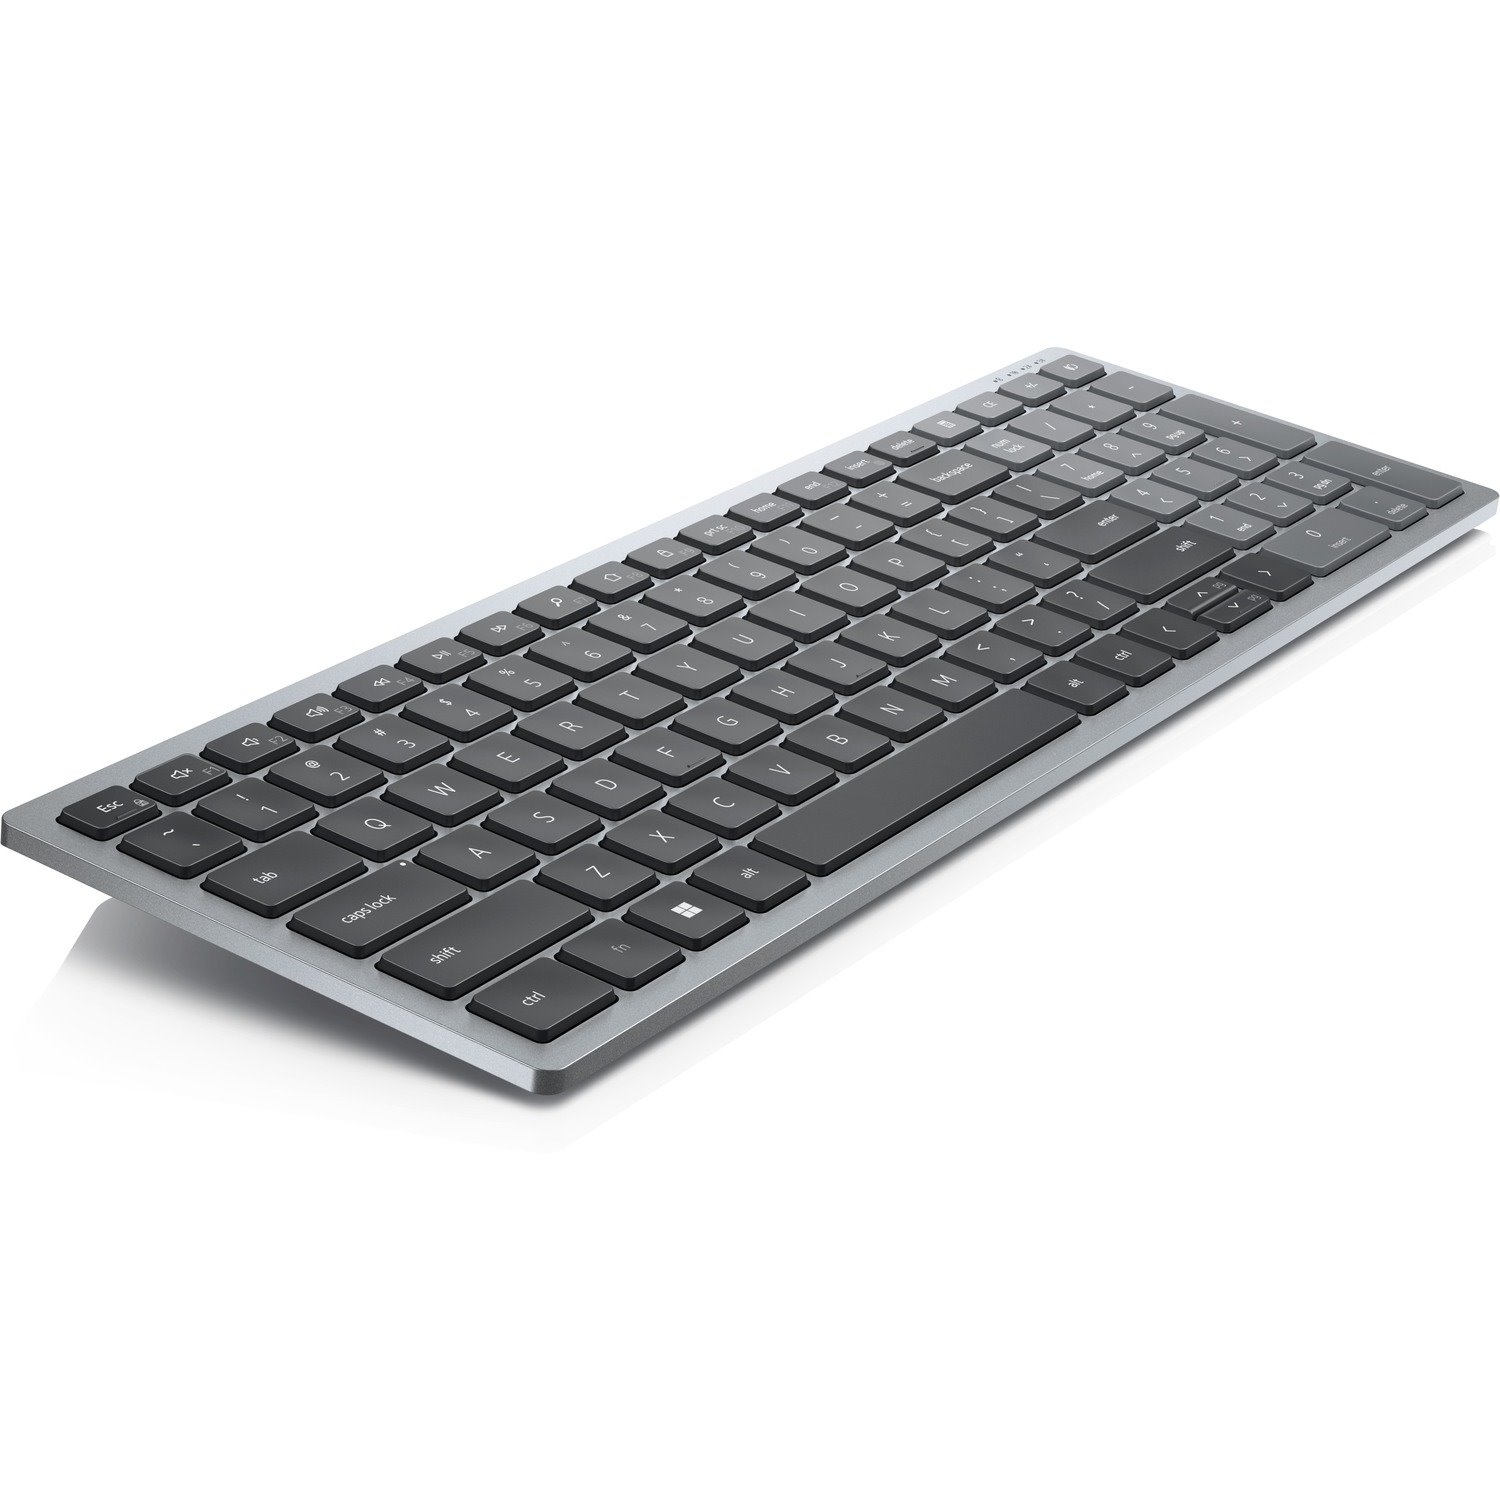 Dell Compact KB740 Keyboard - Wireless Connectivity - English (US) - QWERTY Layout - Titan Gray